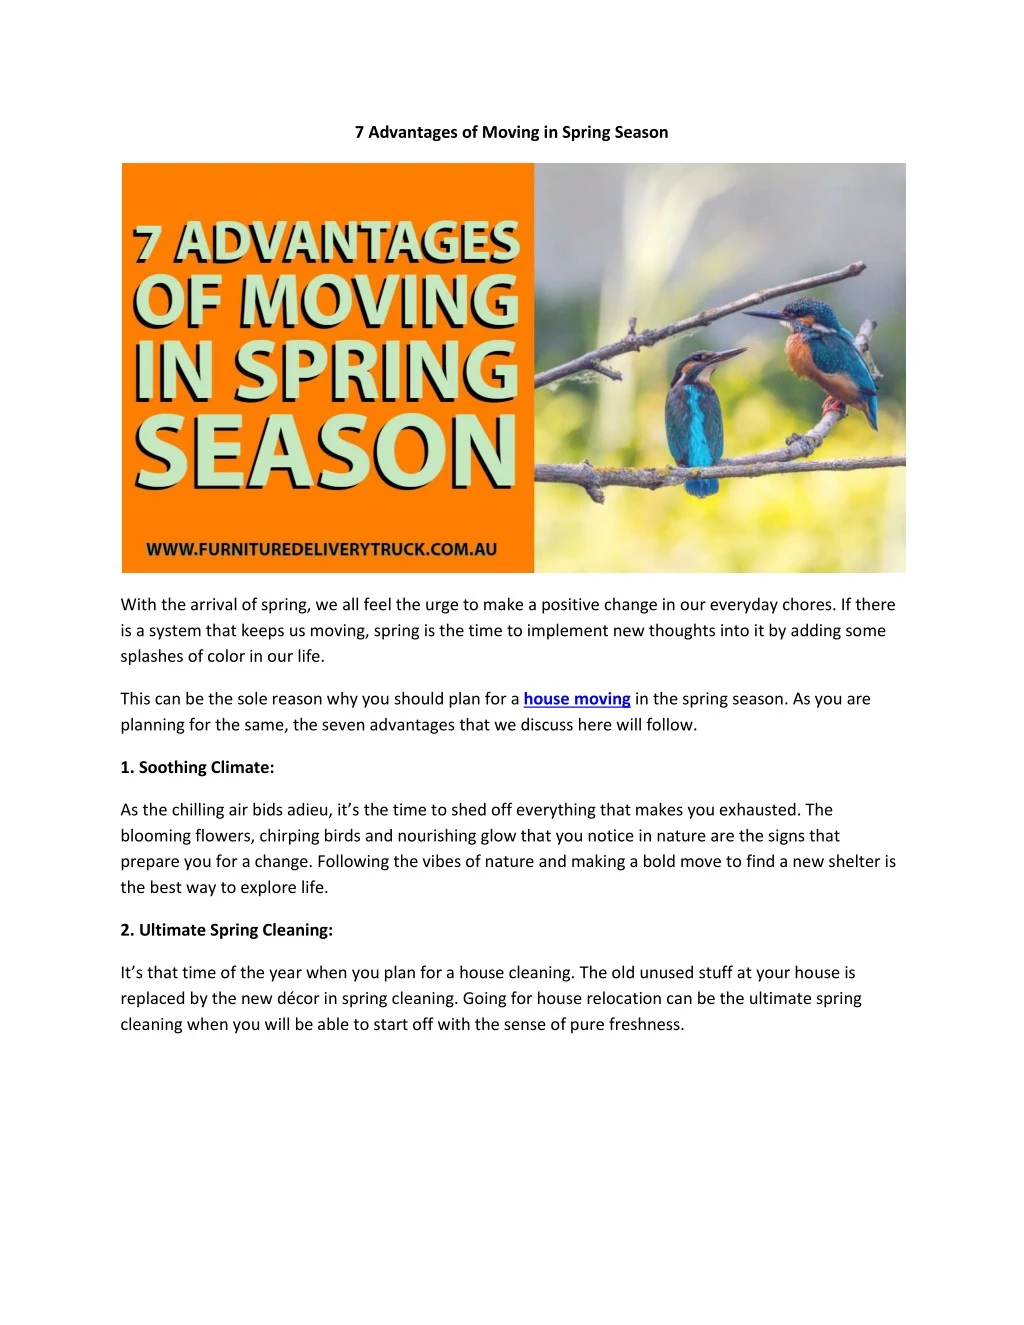 7 advantages of moving in spring season